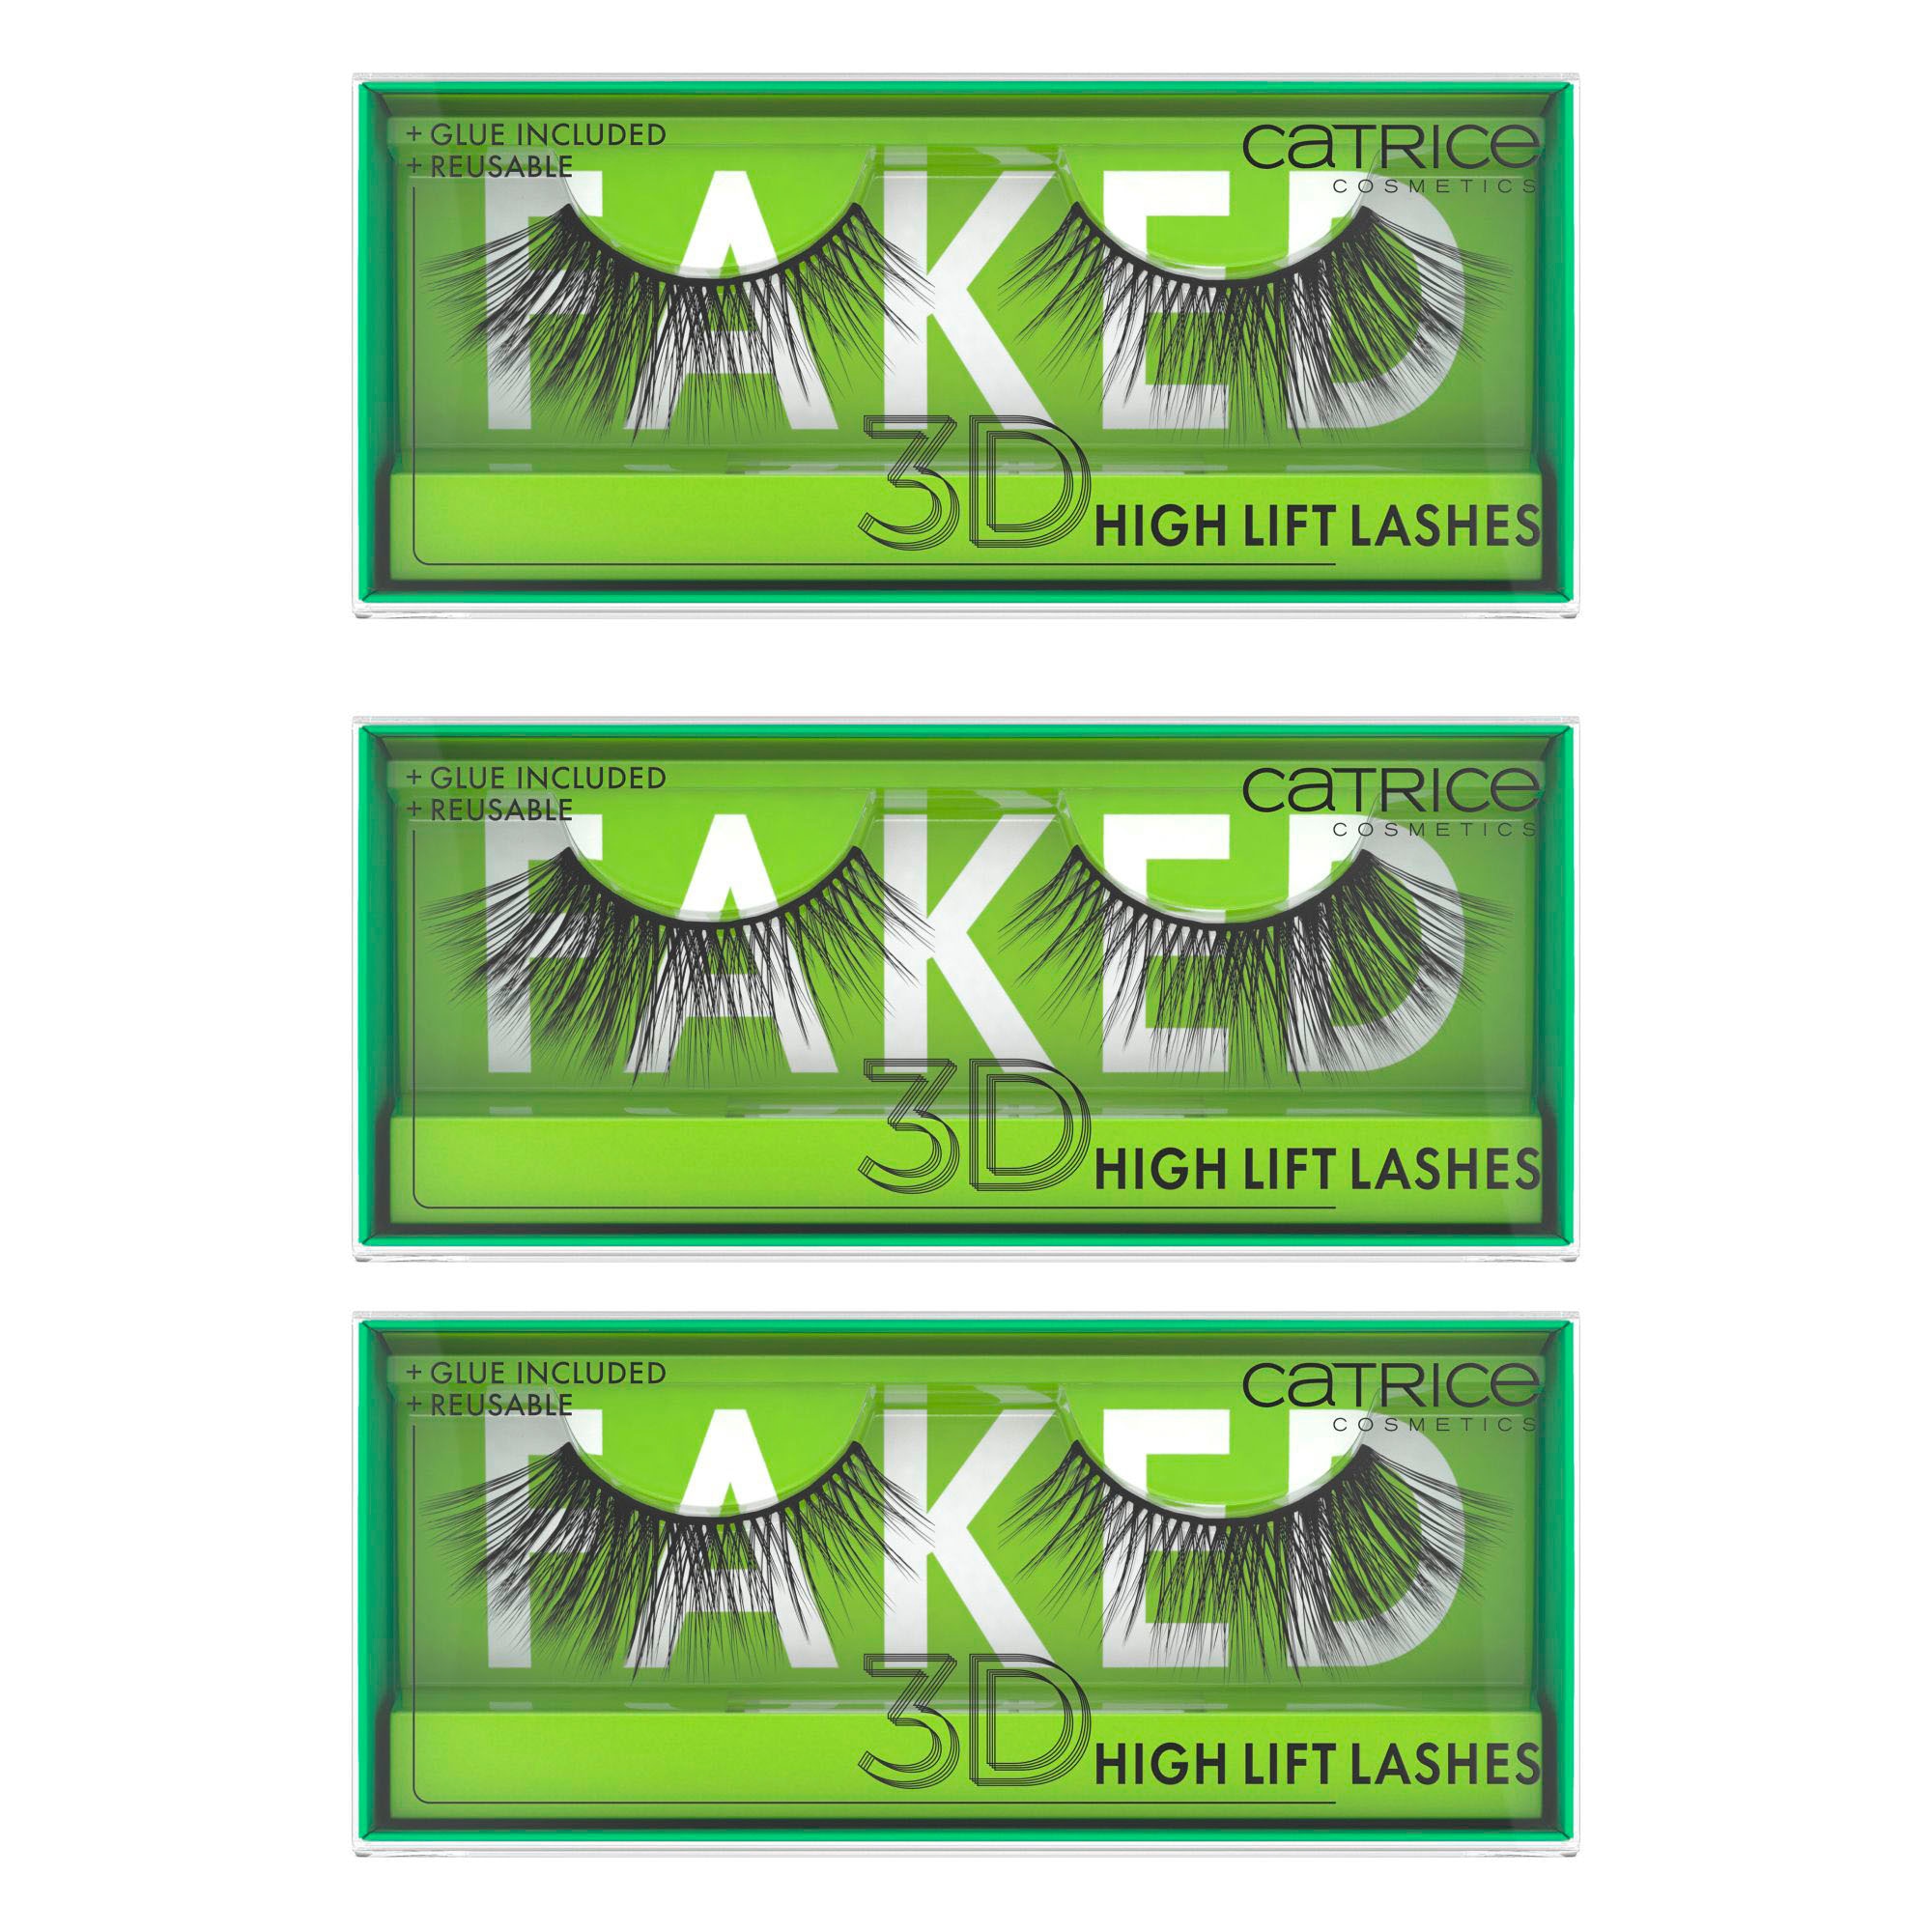 online »Faked 3 Bandwimpern tlg.) (Set, UNIVERSAL High bei Lashes«, Lift 3D Catrice